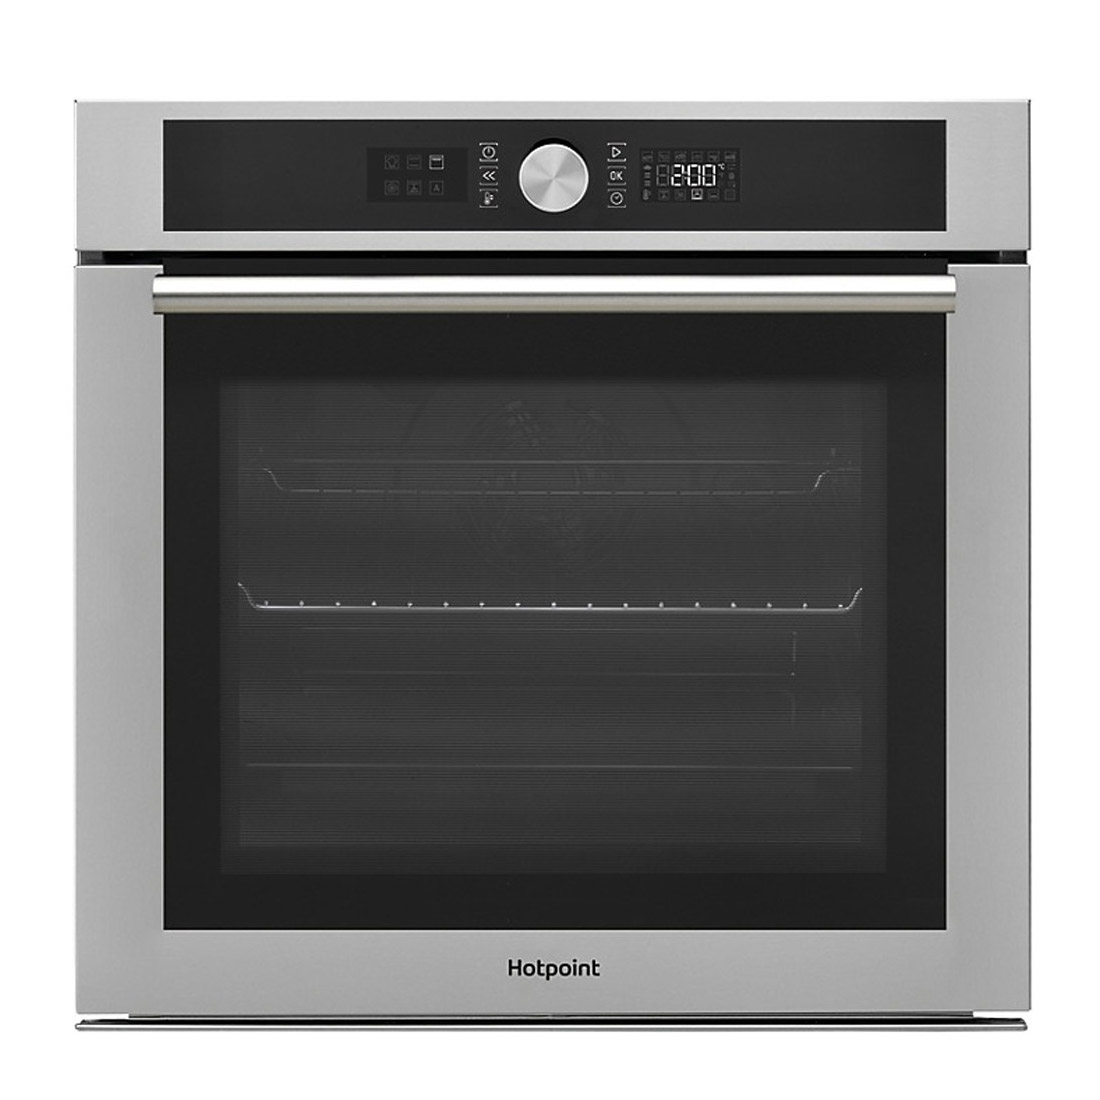 Image of Hotpoint SI4854PIX Built In Electric Single Oven in St Steel 71L